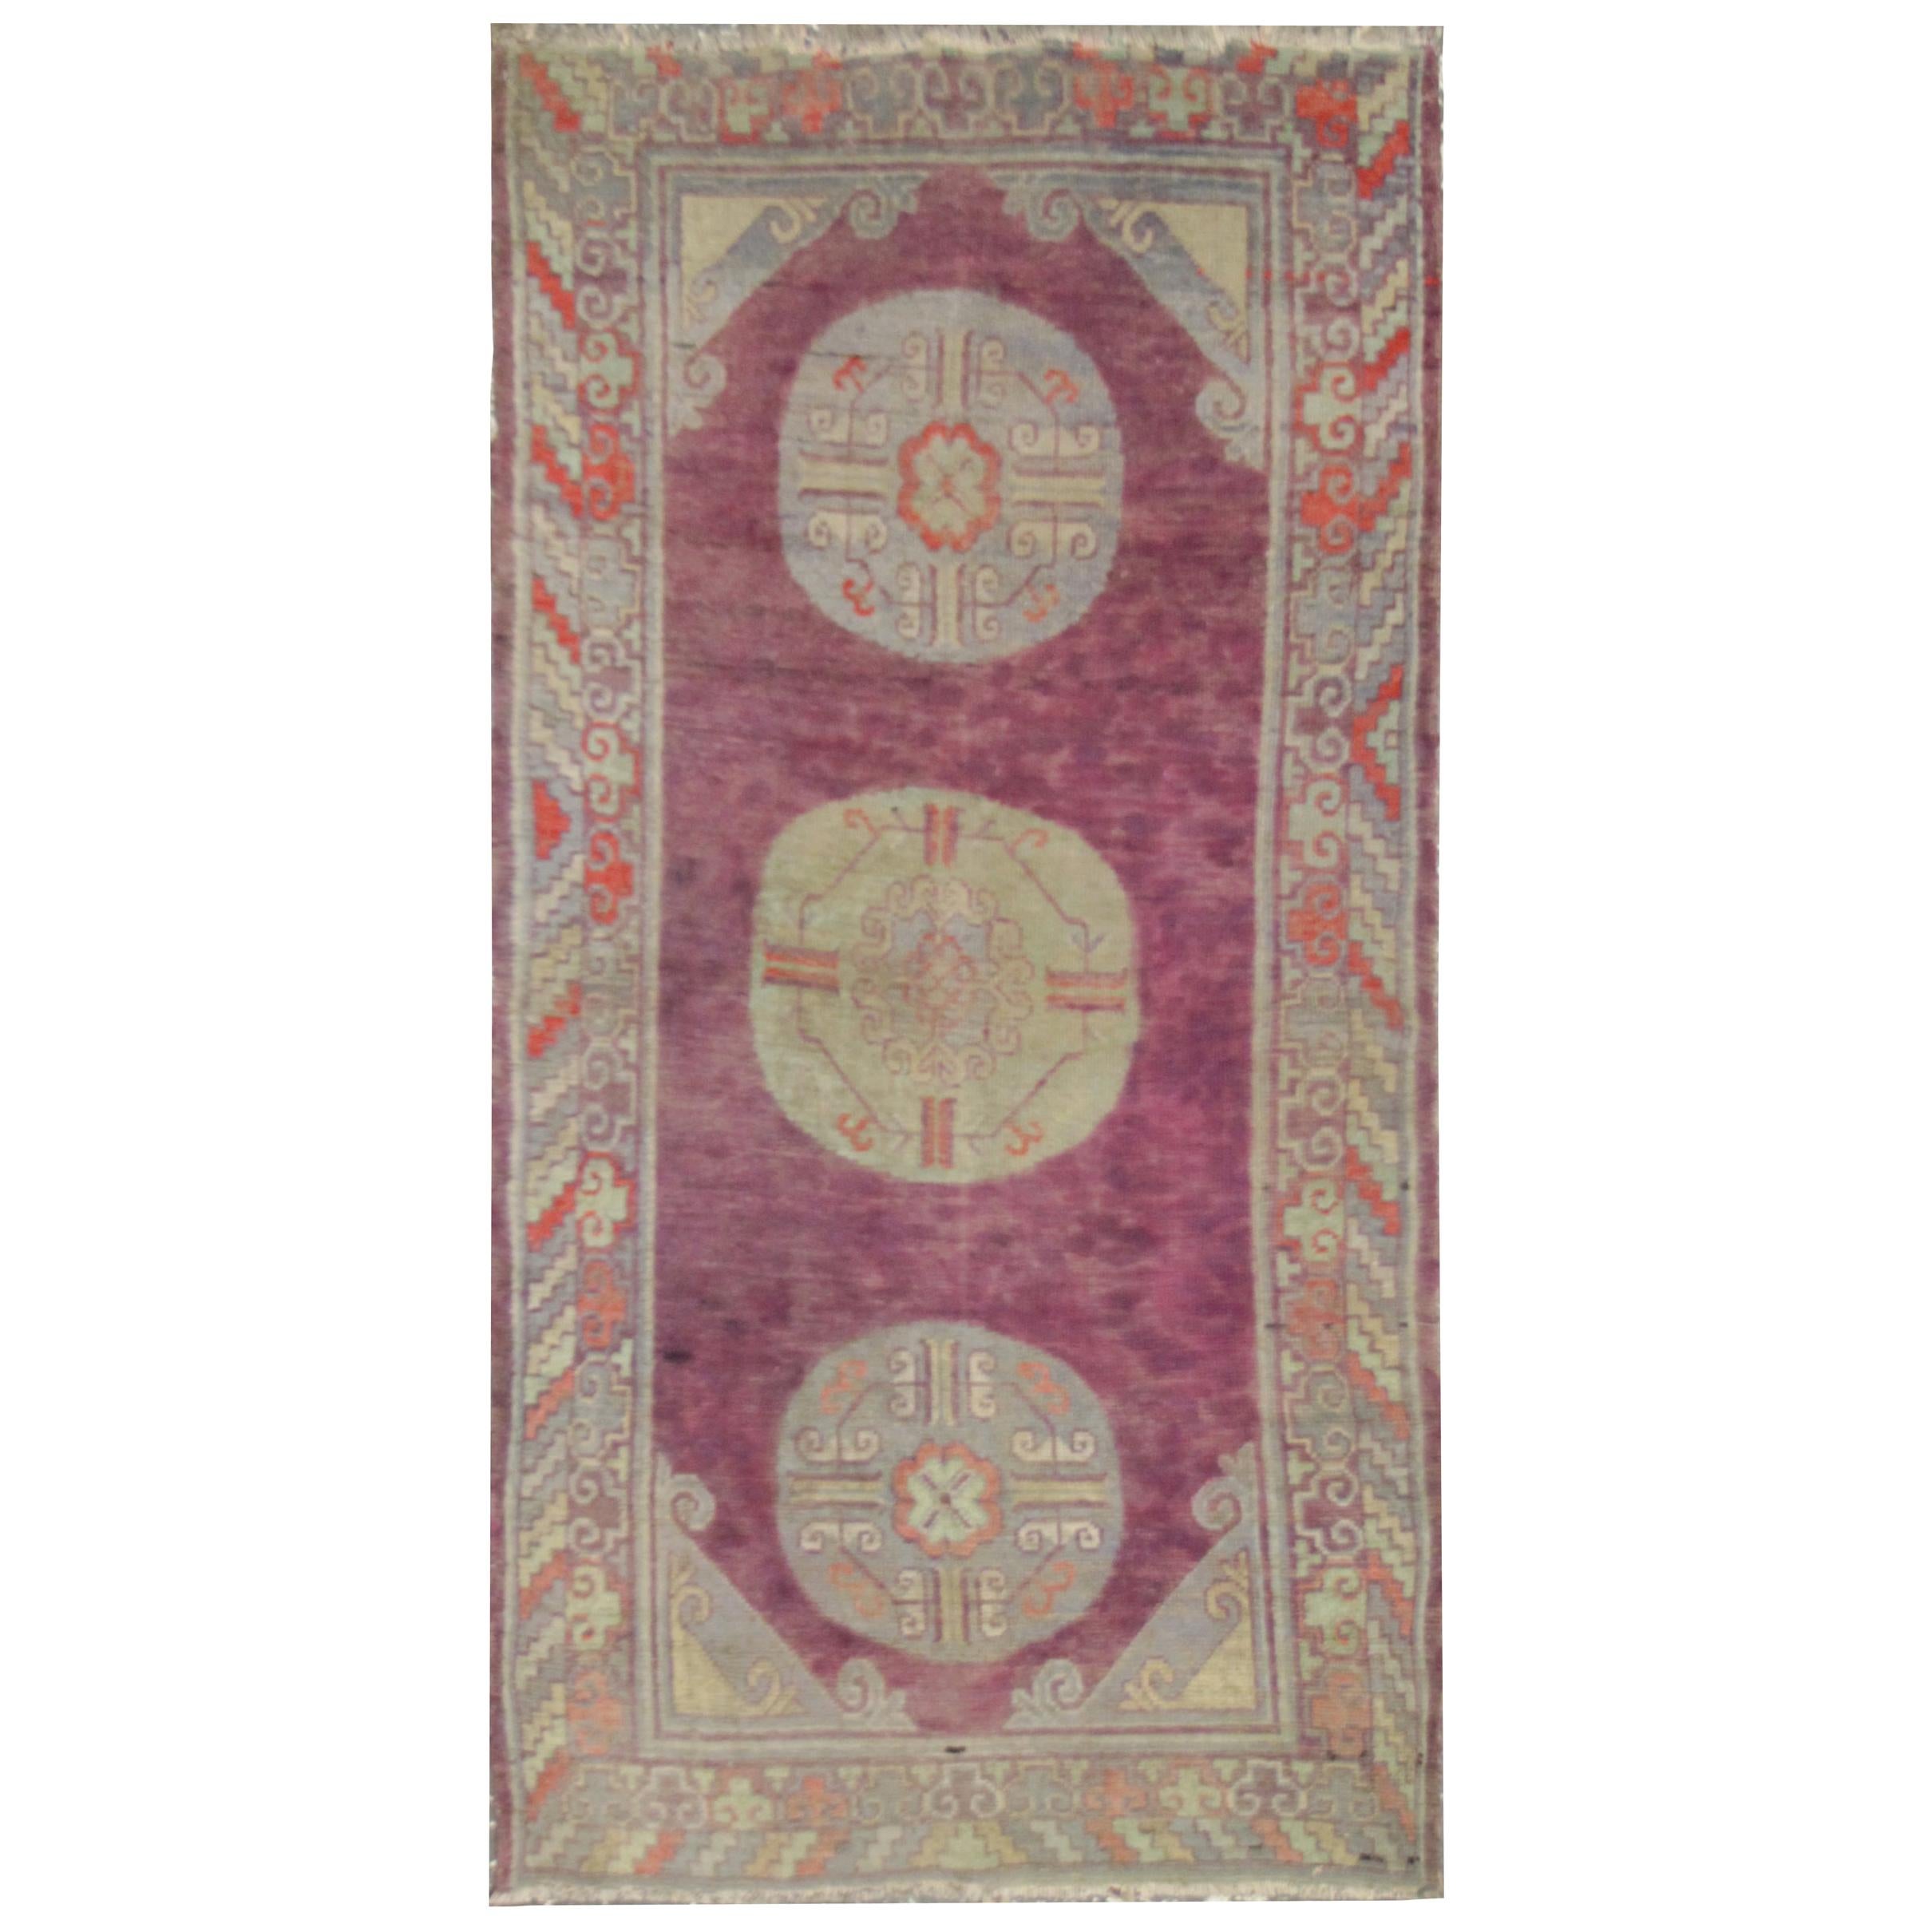 High-Quality Antique Rug Oriental Khotan, Pastel Colored Living Room Rugs